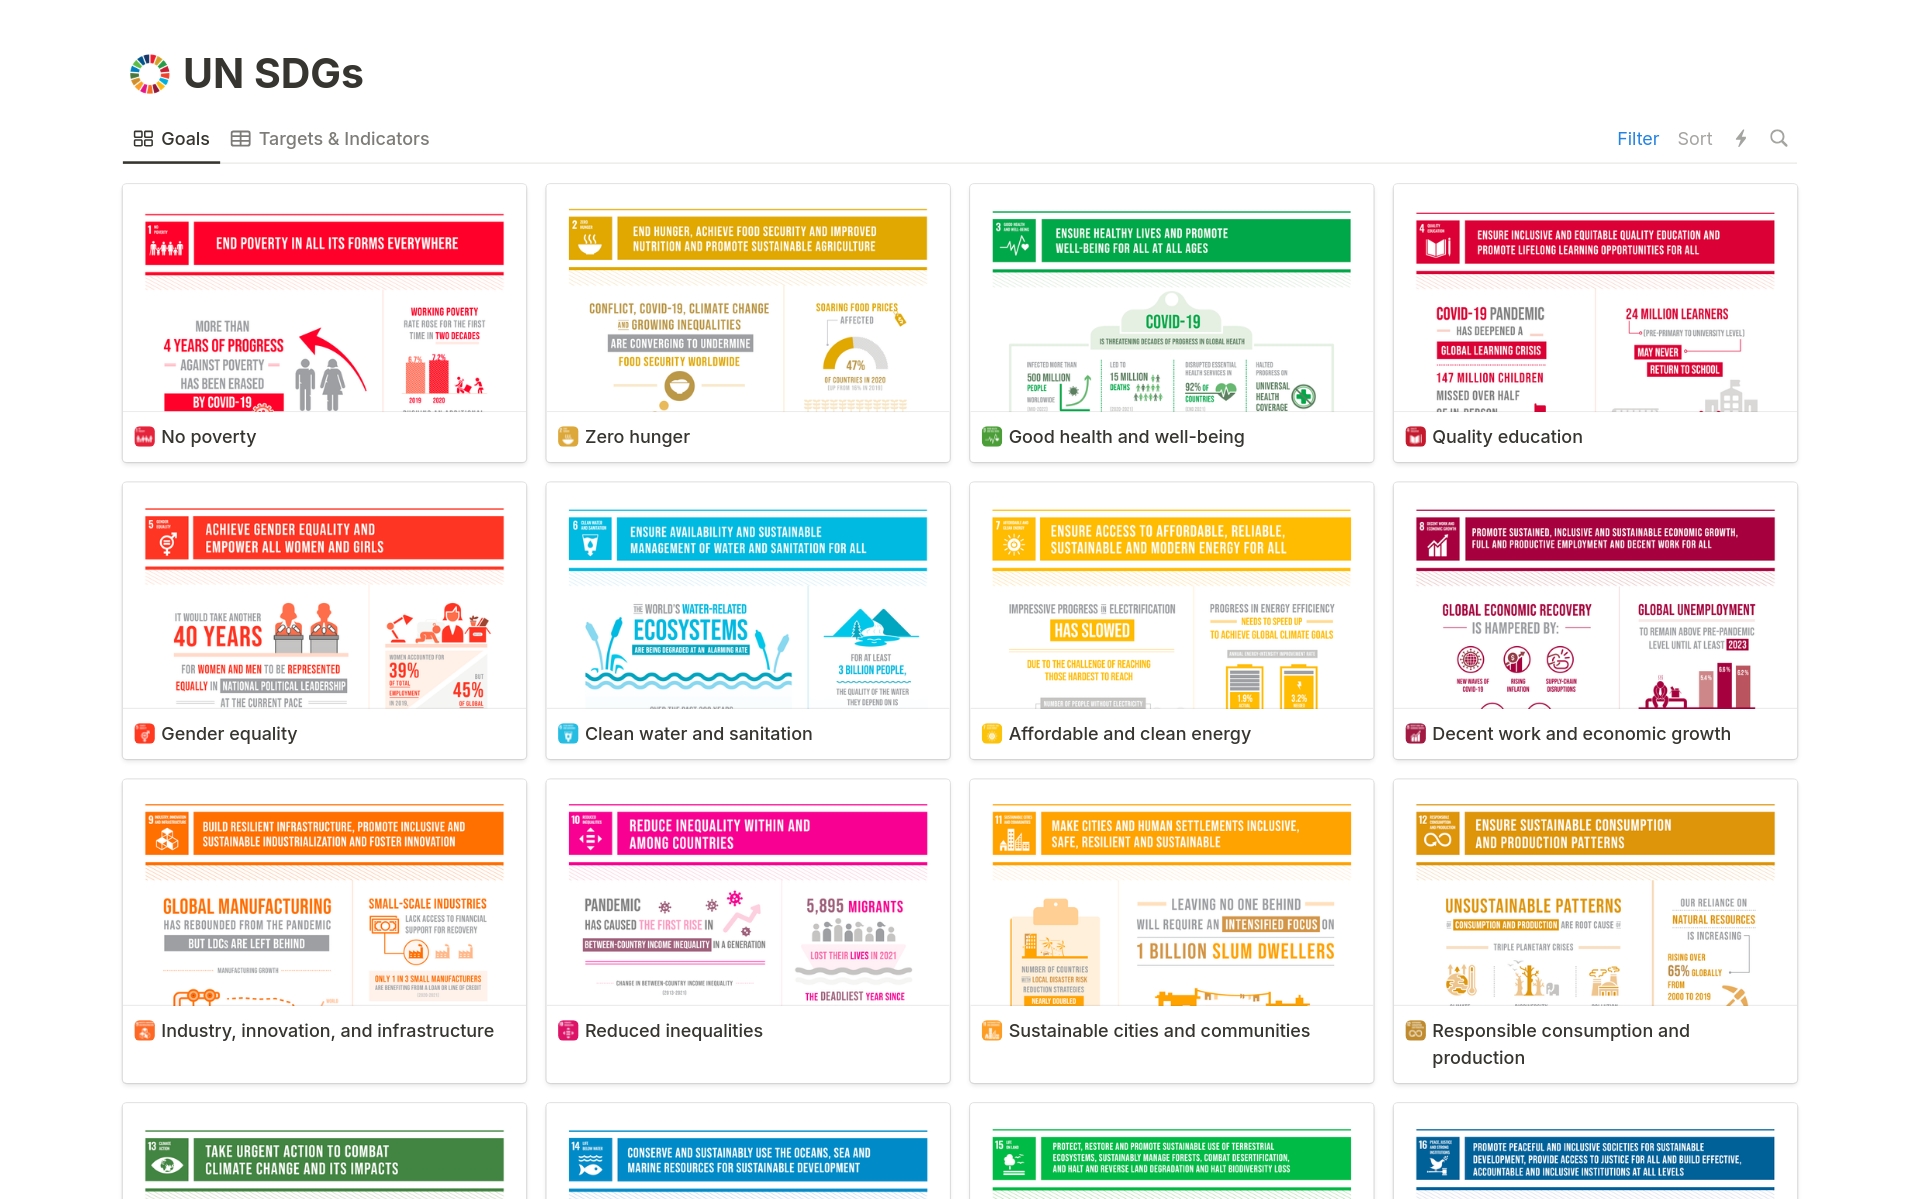 The UN's 17 Sustainable Development Goals, with all the targets and indicators, as well as the current status for each goal.